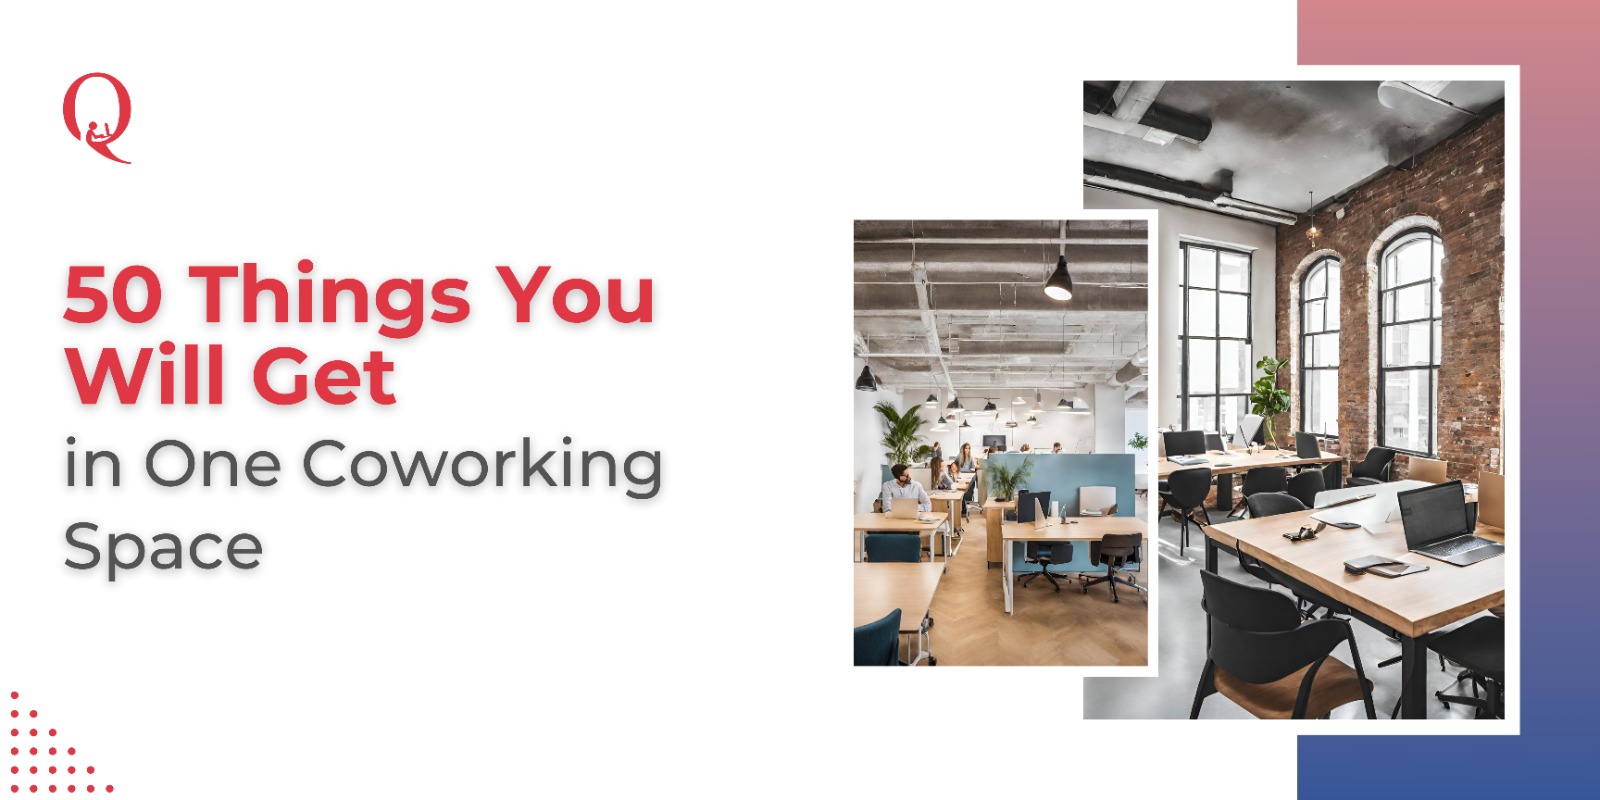 coworking space with qdesq